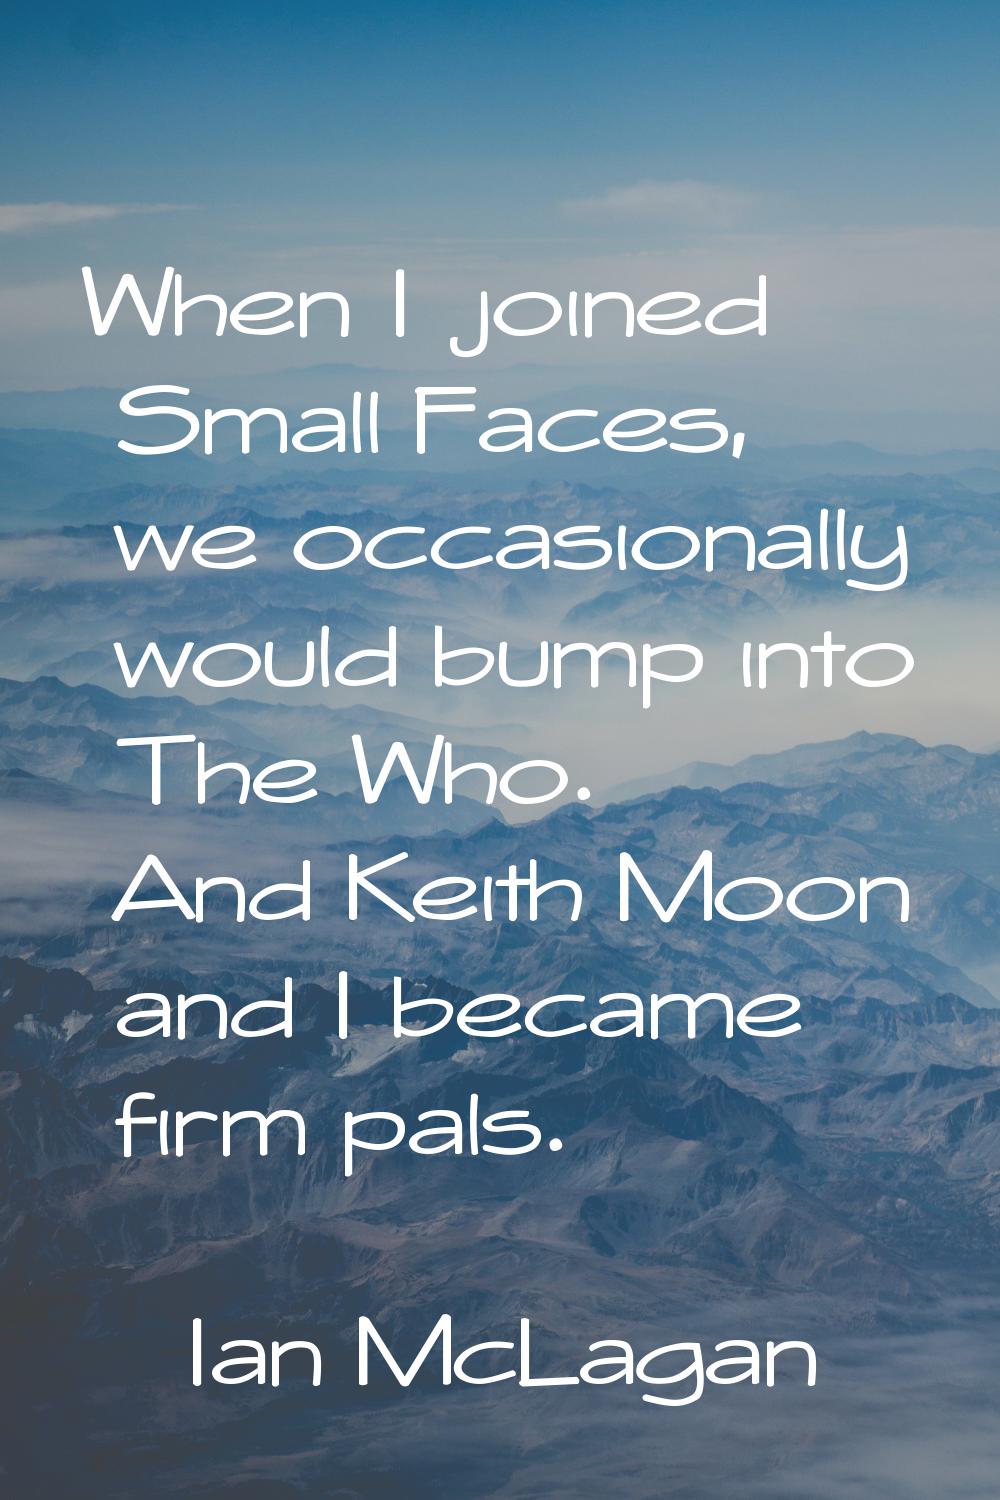 When I joined Small Faces, we occasionally would bump into The Who. And Keith Moon and I became fir